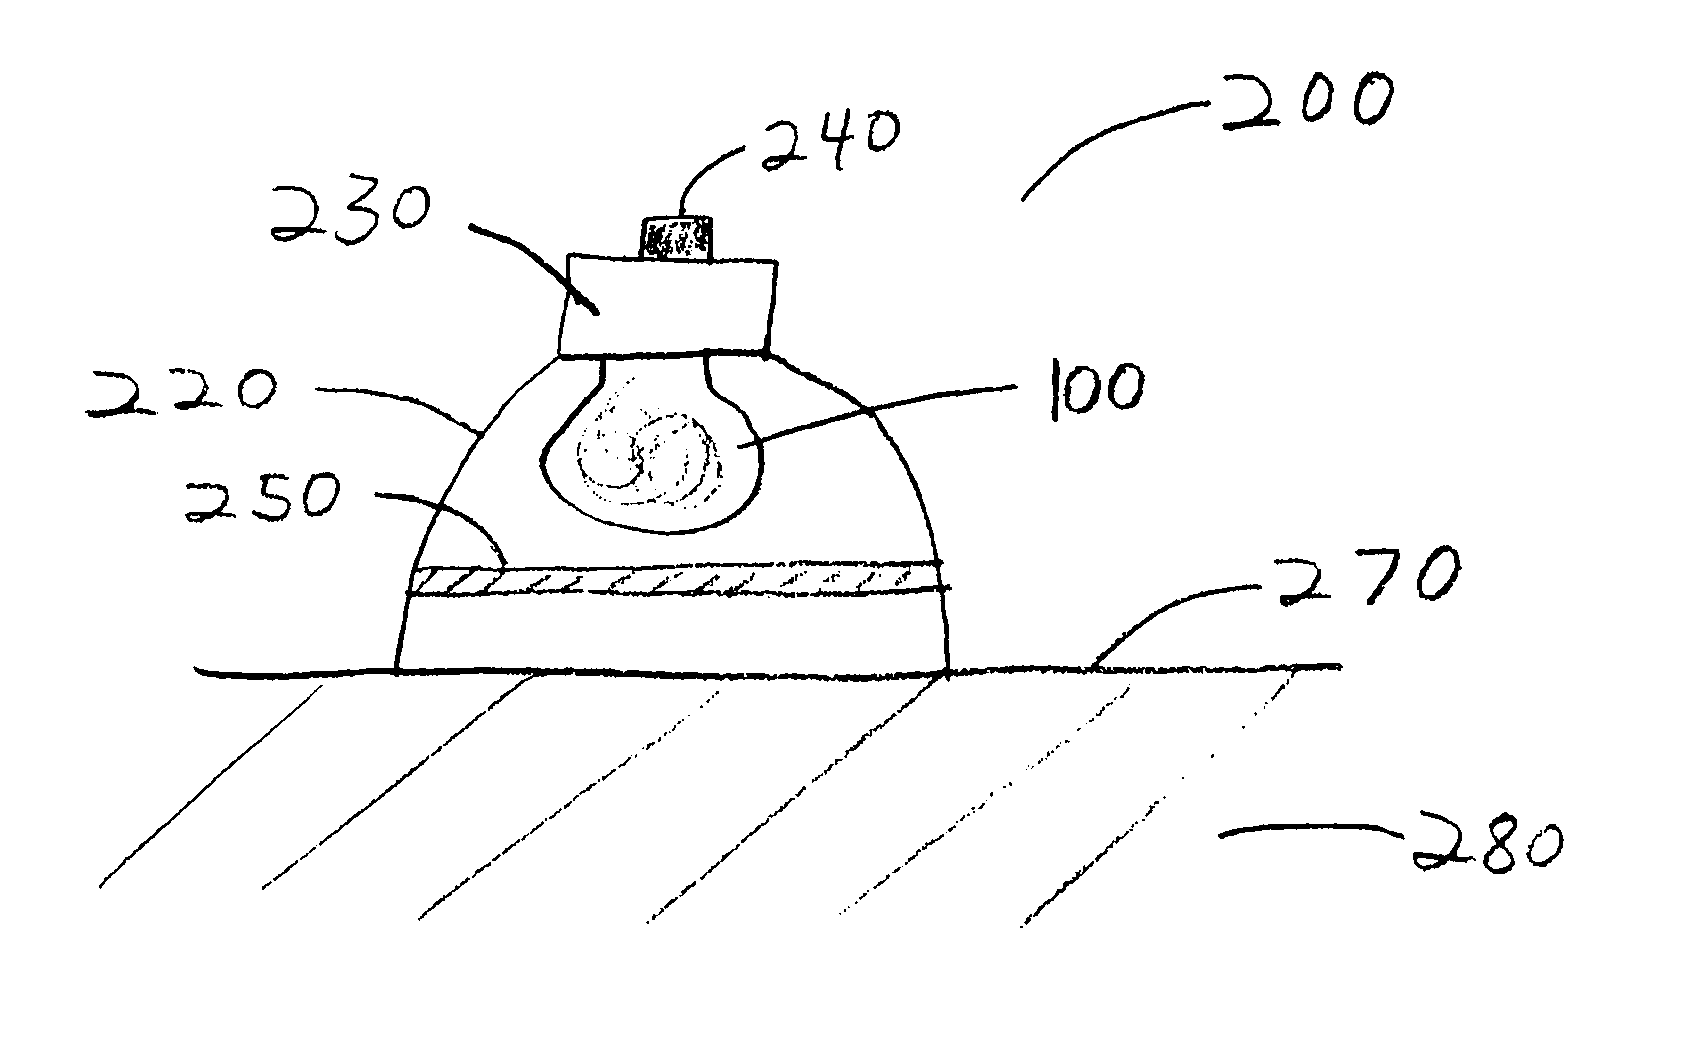 System and apparatus for dermatological treatment